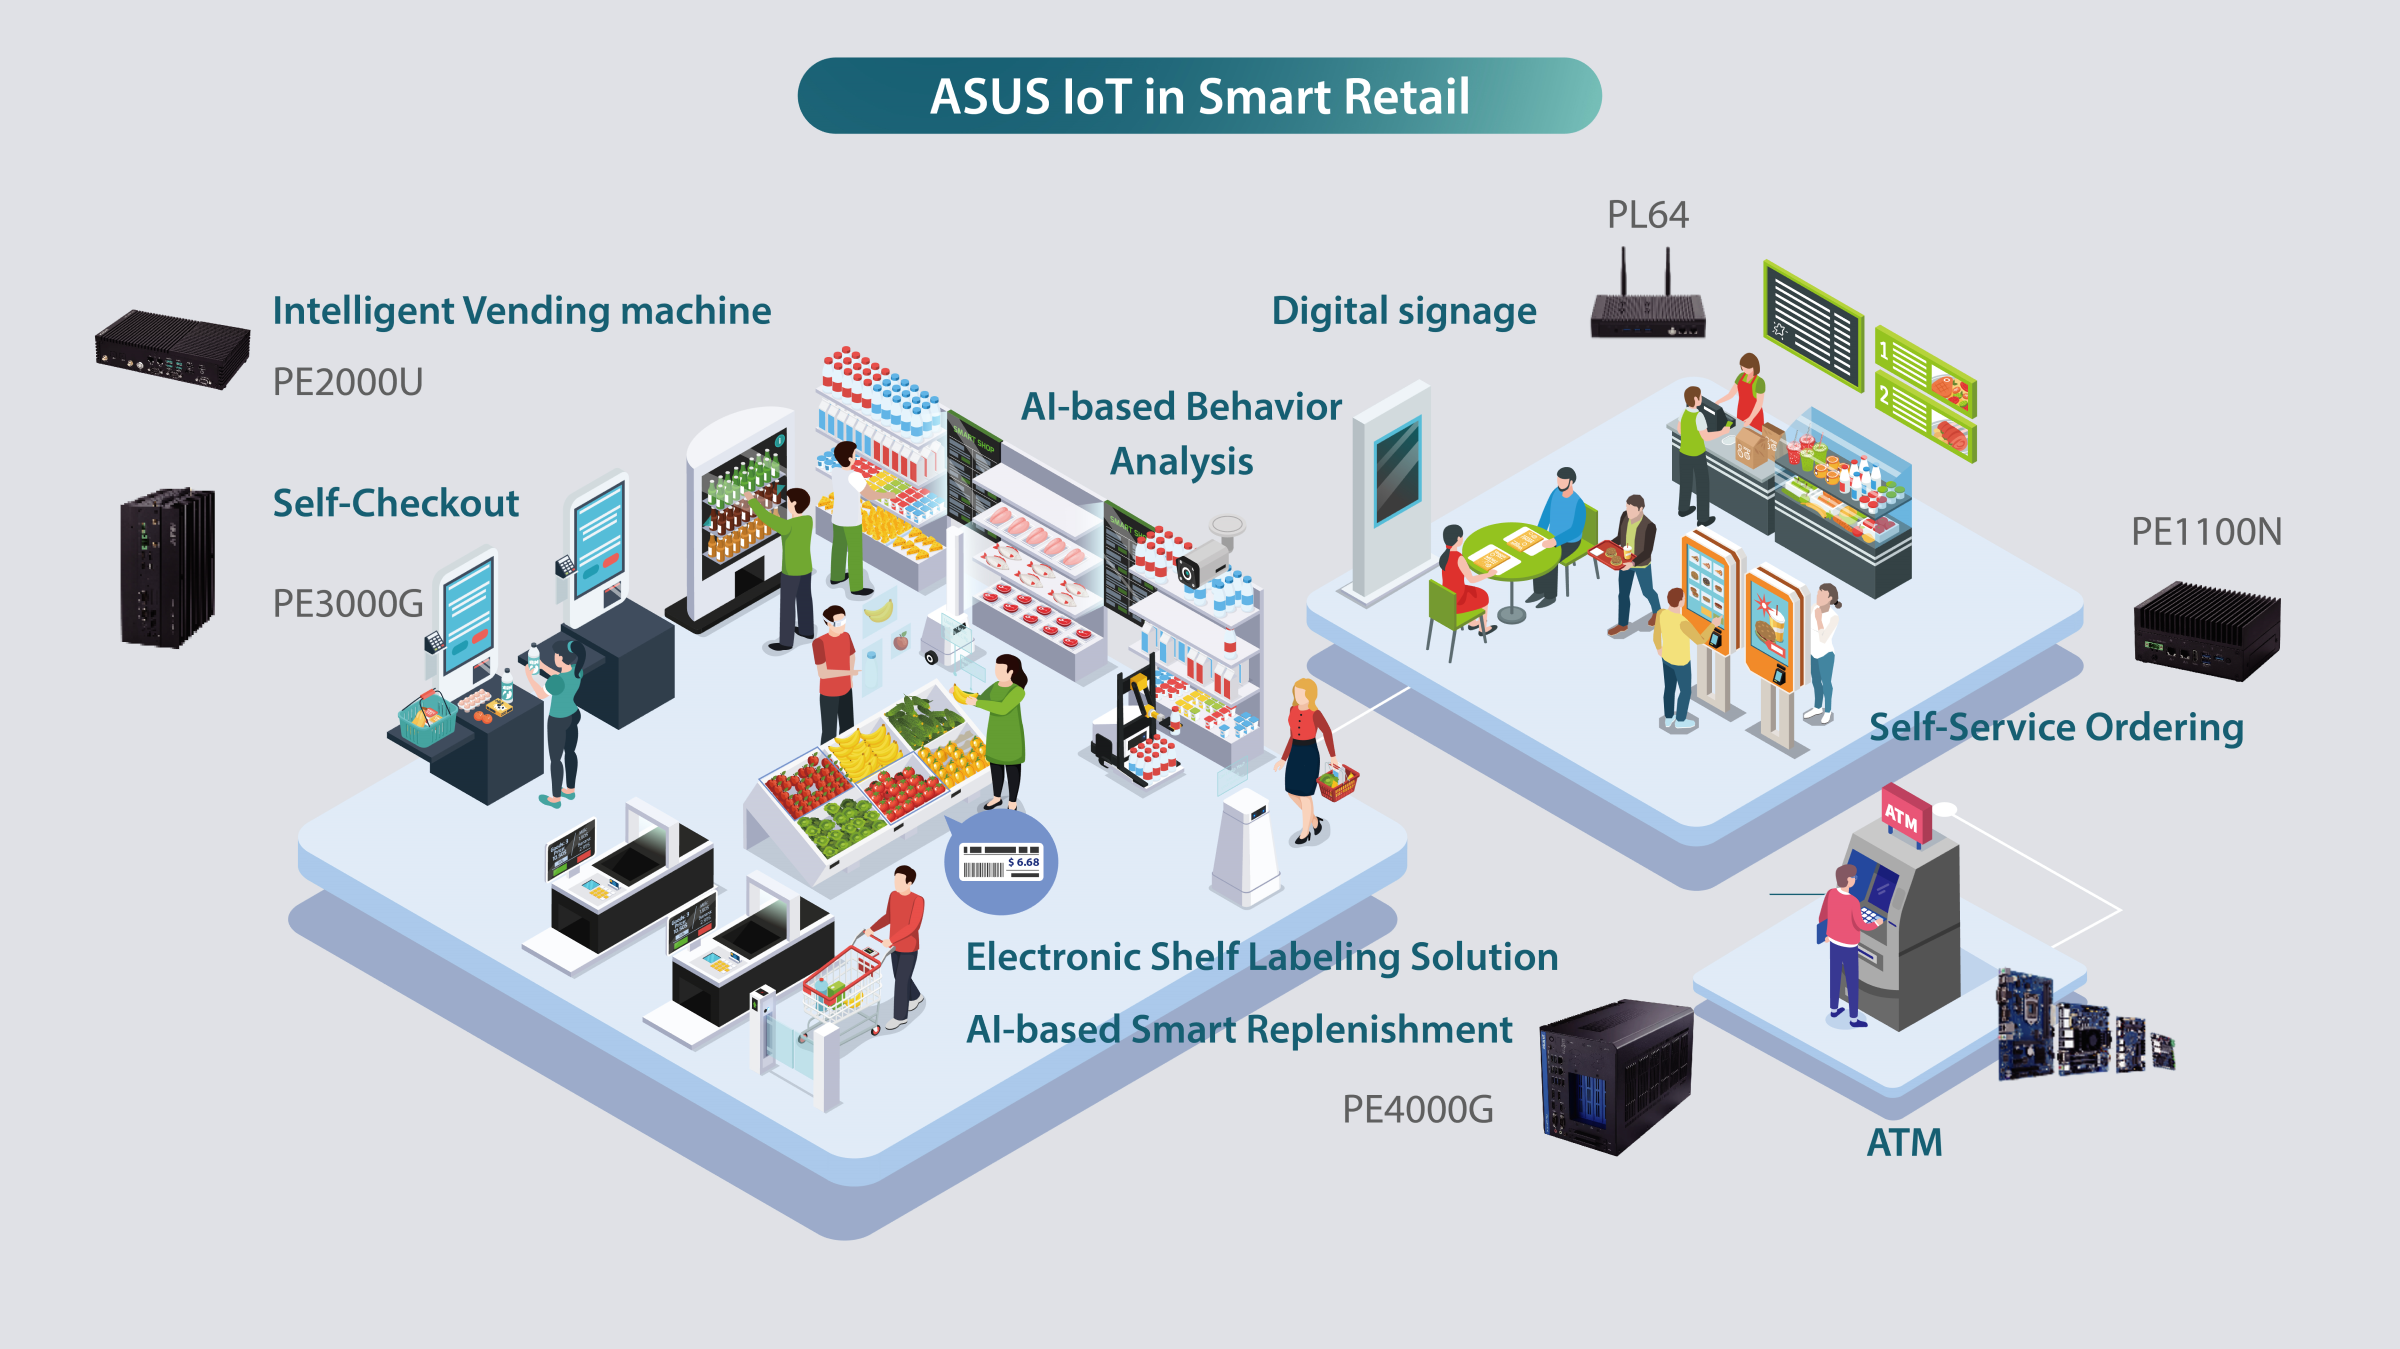 A slide showing comprehensive ASUS smart retail solutions in restaurant, supermarket and ATM, powered by ASUS IoT industrial motherboard and edge computer.